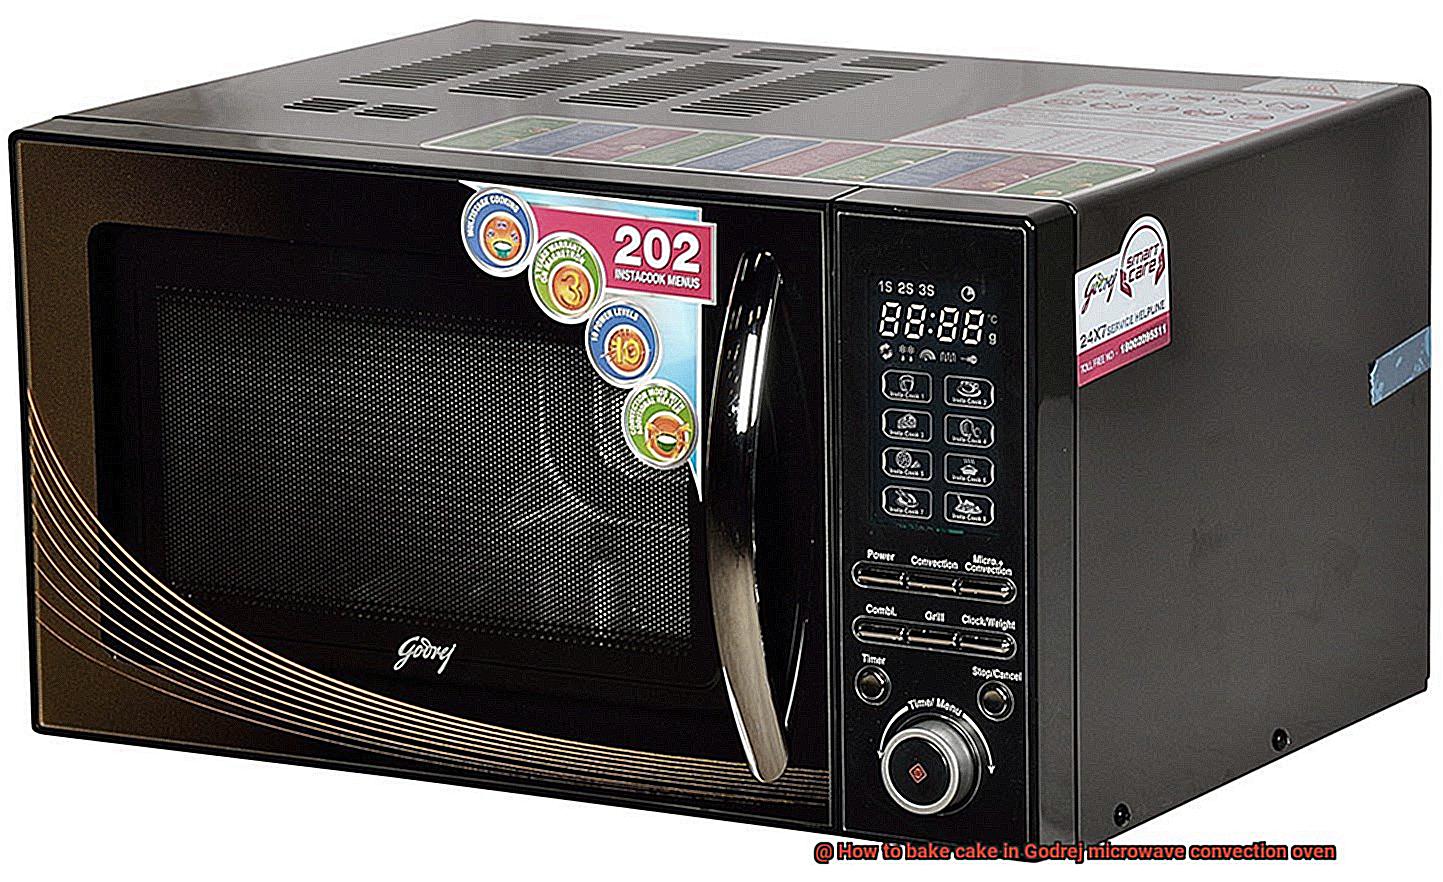 How to bake cake in Godrej microwave convection oven-9